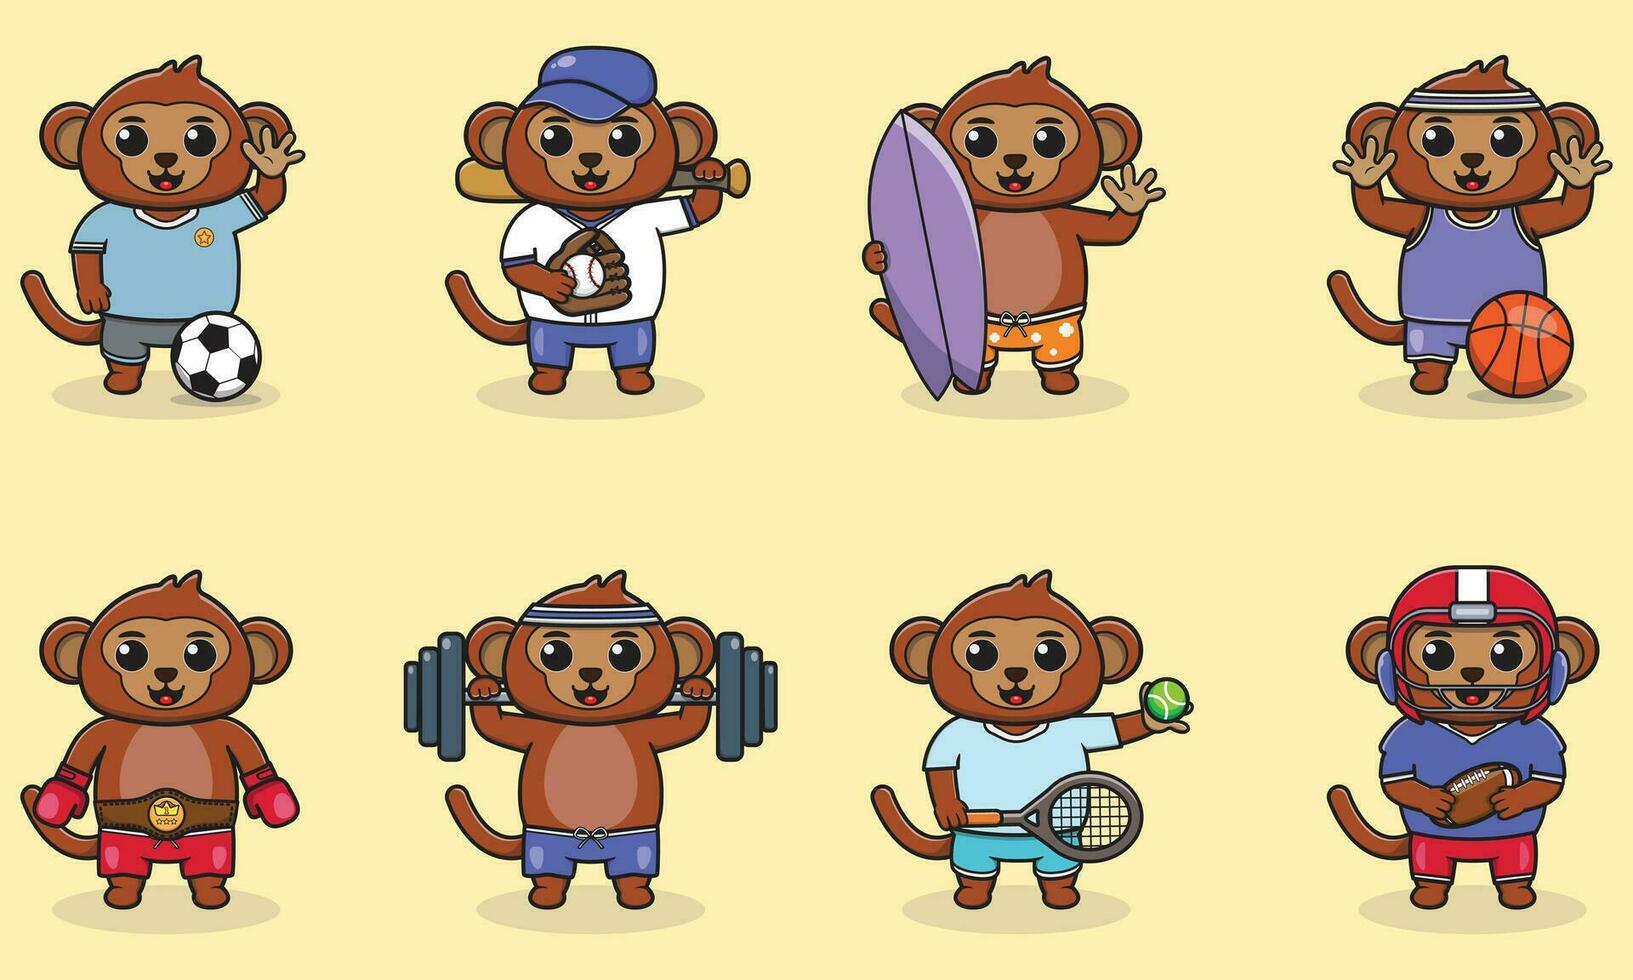 Set of Monkey wearing uniform and using sports equipment. Funny animals doing exercis. Cute cartoon character vector set isolated on a white background. Cartoon animal sport. Monkey cartoon.